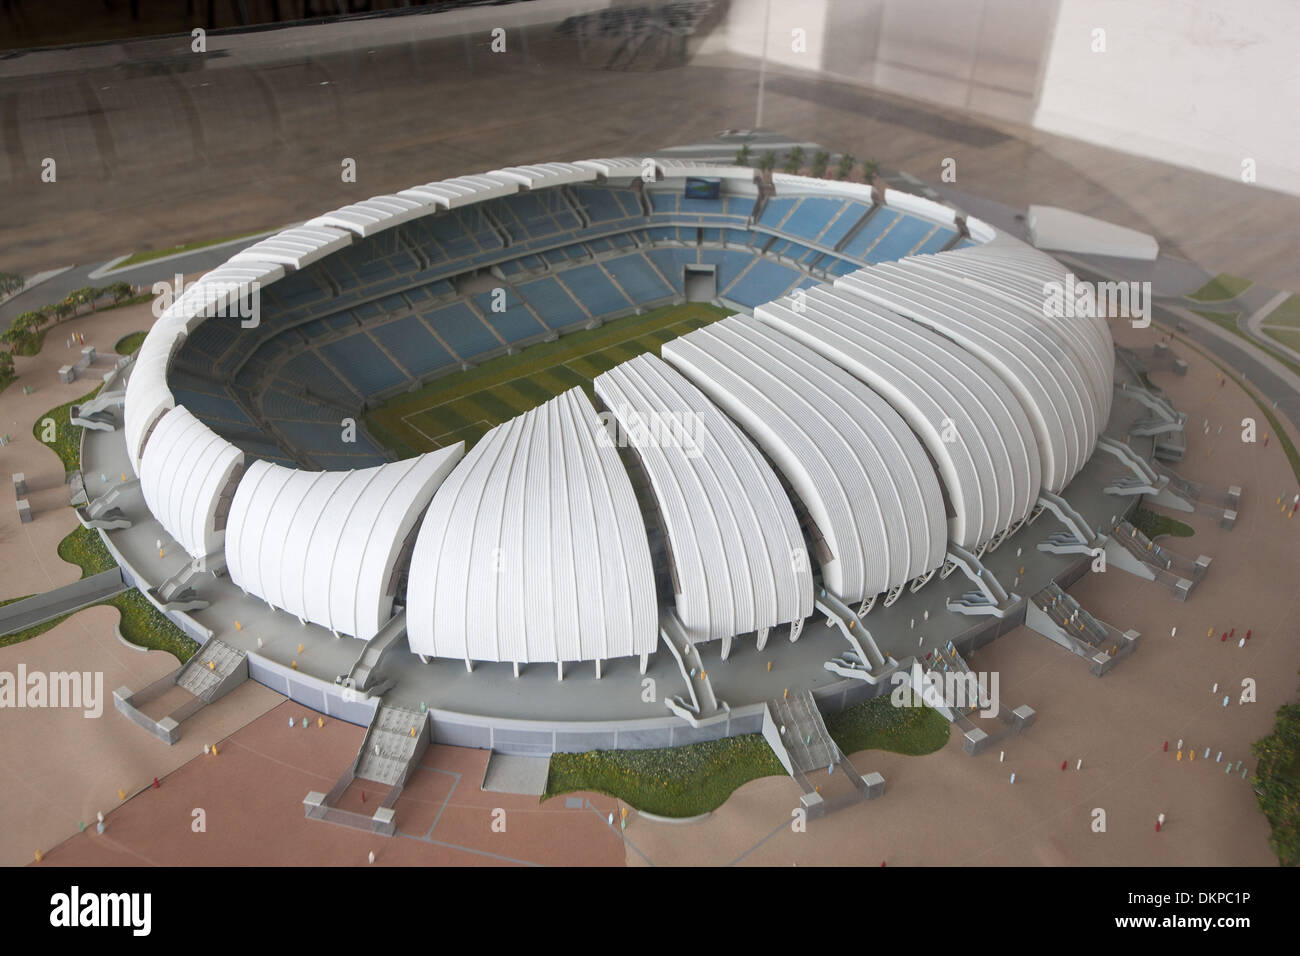 (131209) -- NATAL, Dec. 9, 2013 (Xinhua) -- Photo taken on Dec. 8, 2013 shows the model of Arena das Dunas in Natal, Rio Grande do Norte, Brazil. Arena das Dunas, which is scheduled to finish the reformation on Jan. 14, 2013, will hold four group matchs during the 2014 World Cup. (Xinhua/Xu Zijian) Stock Photo